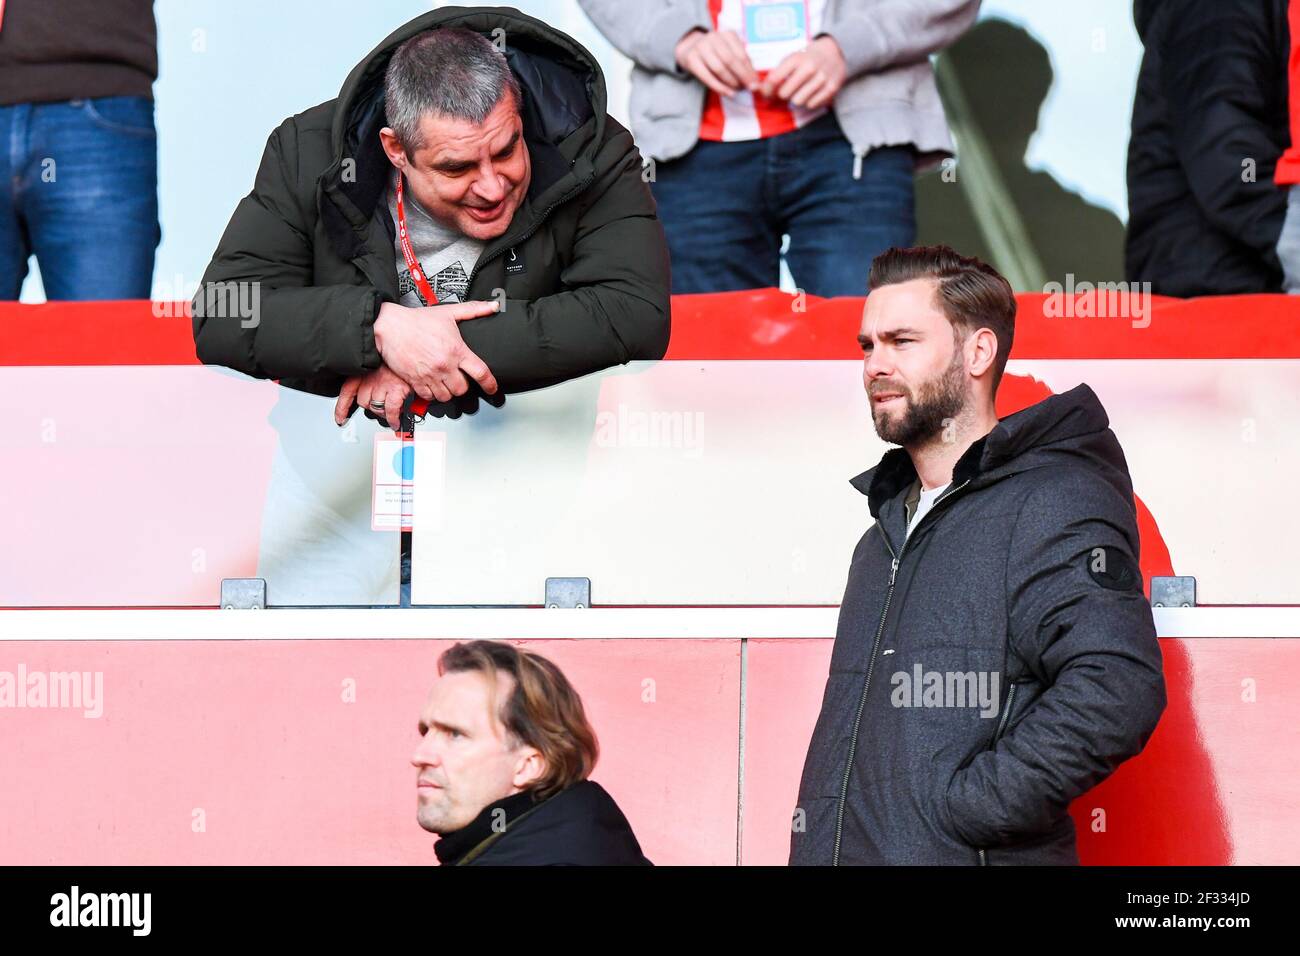 EINDHOVEN, NETHERLANDS - MARCH 14: Frank Lammers during the Dutch Eredivisie match between PSV Eindhoven and Feyenoord Rotterdam at Philips Stadion on Stock Photo